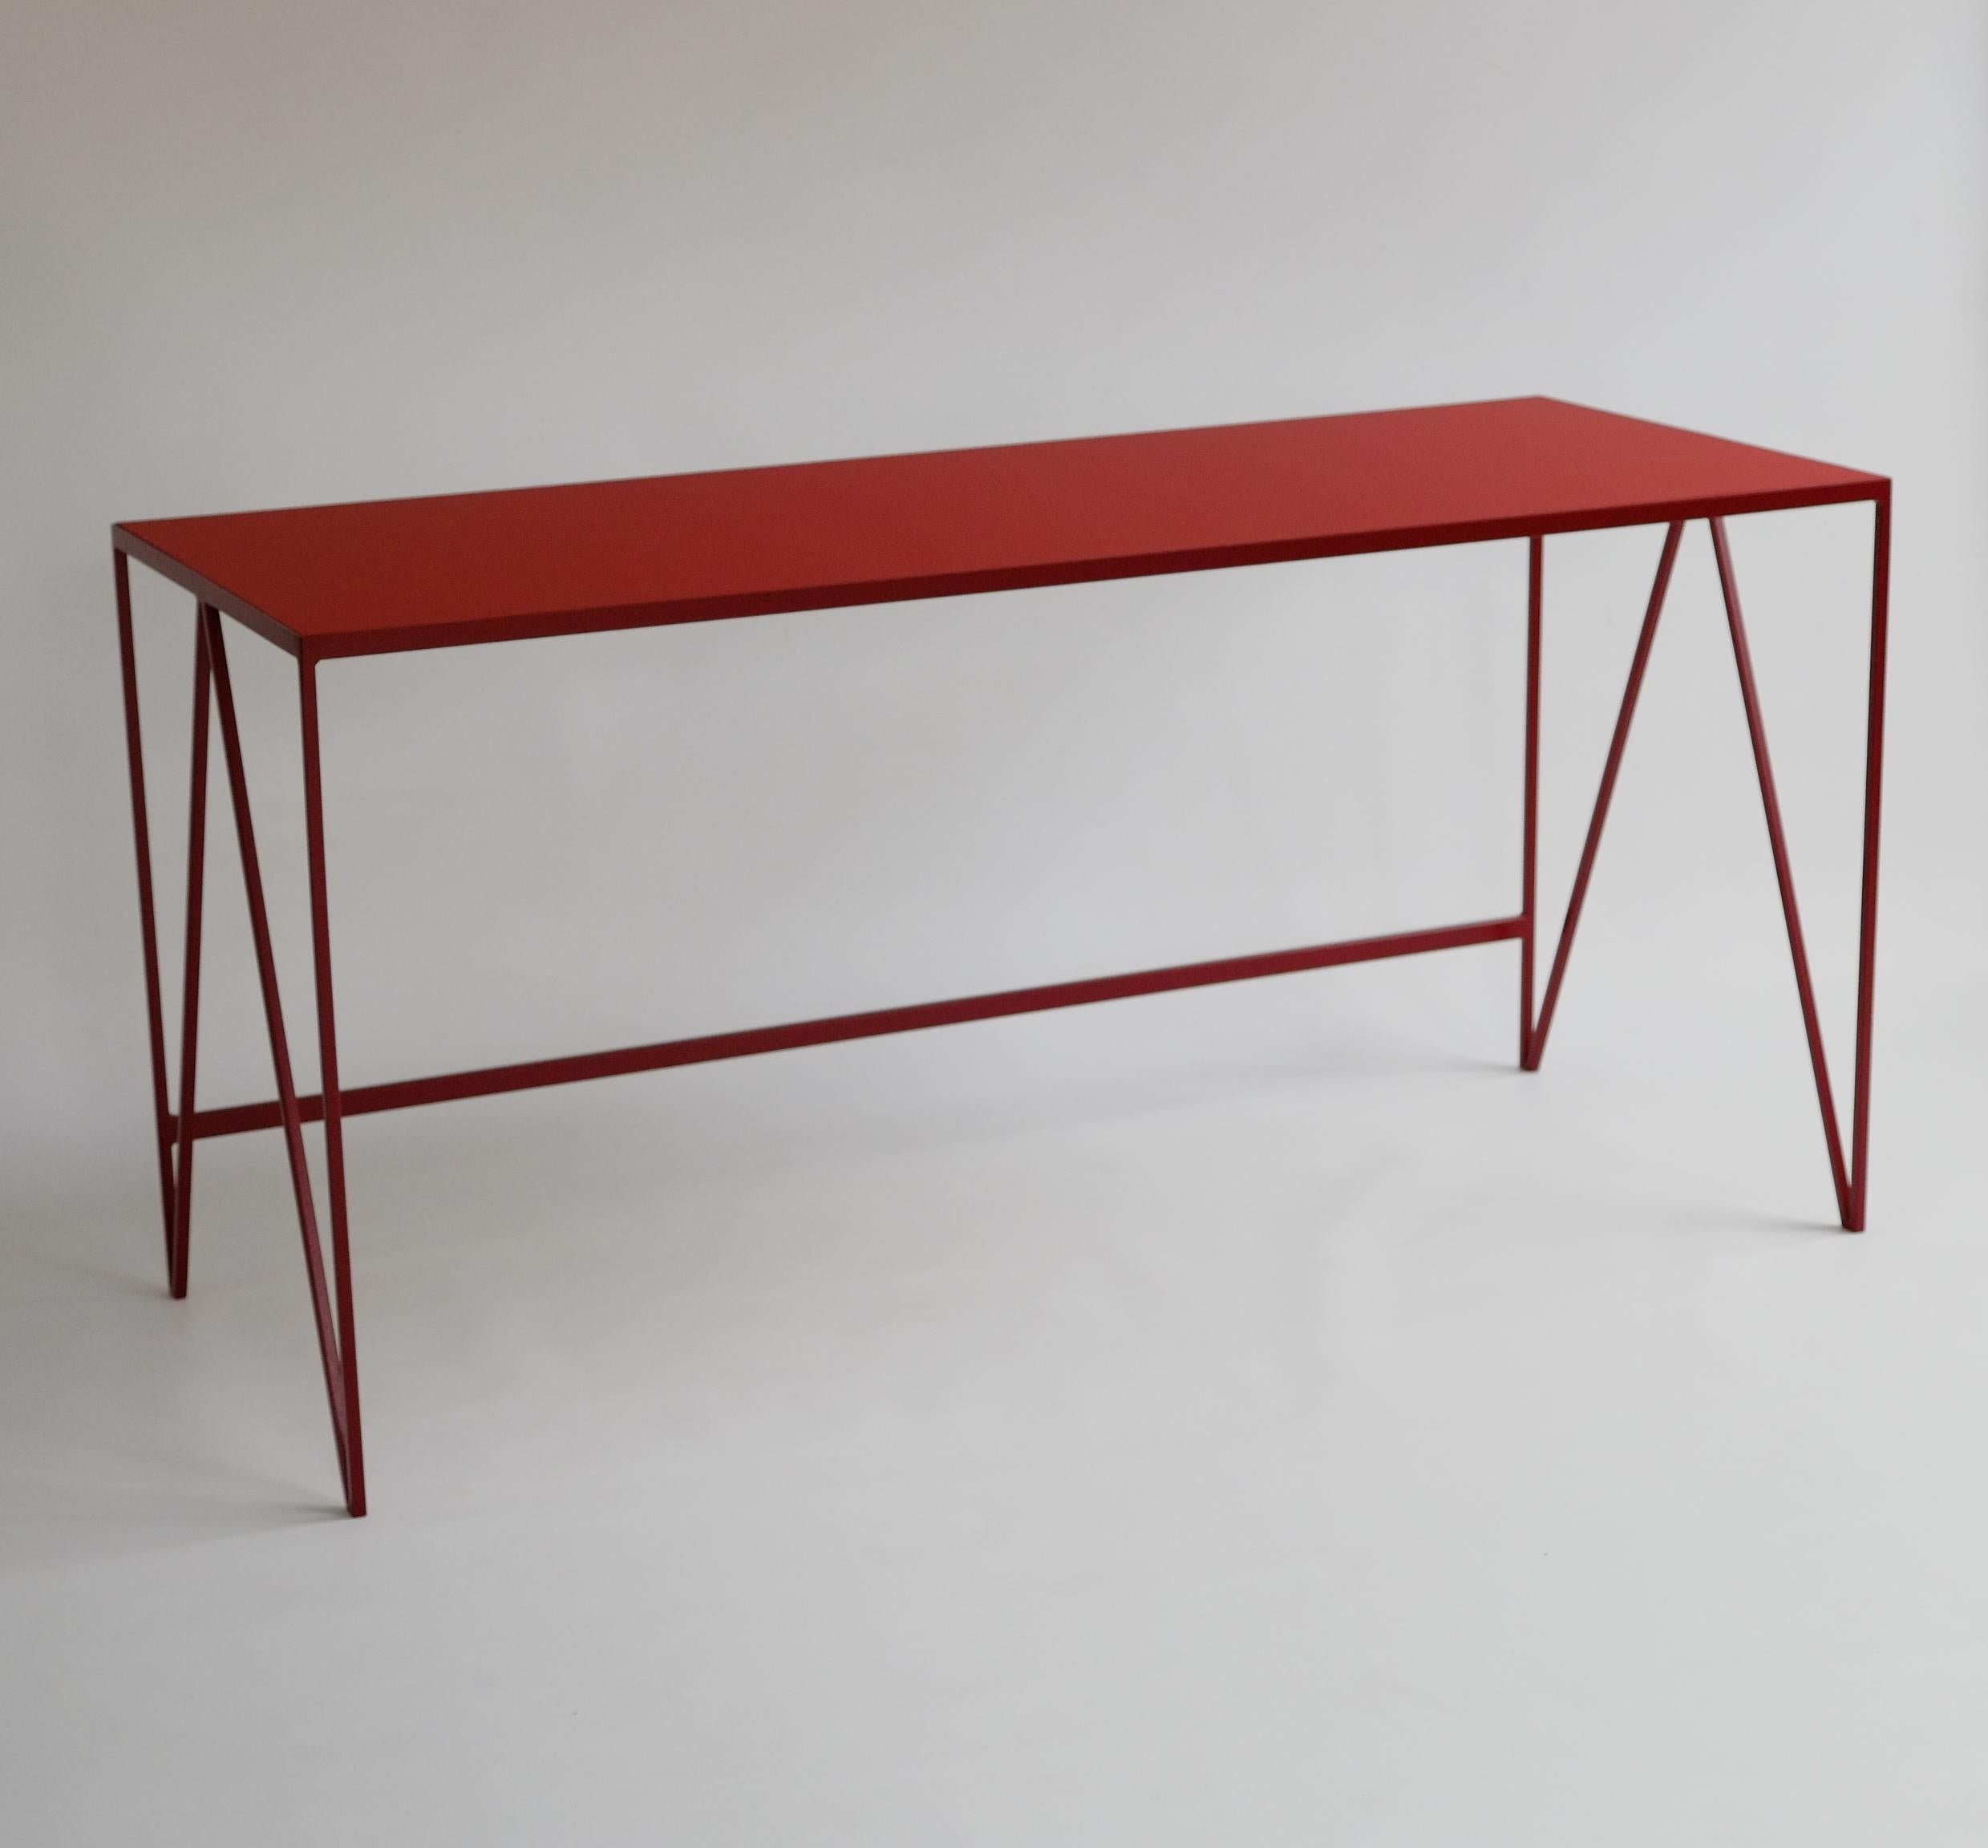 This large study desk is made with a burgundy powder coated steel frame and a deep red linoleum top made from all natural ingredients, such as flax, wood flour and limestone. The furniture linoleum provides a natural satin matt surface with a warm